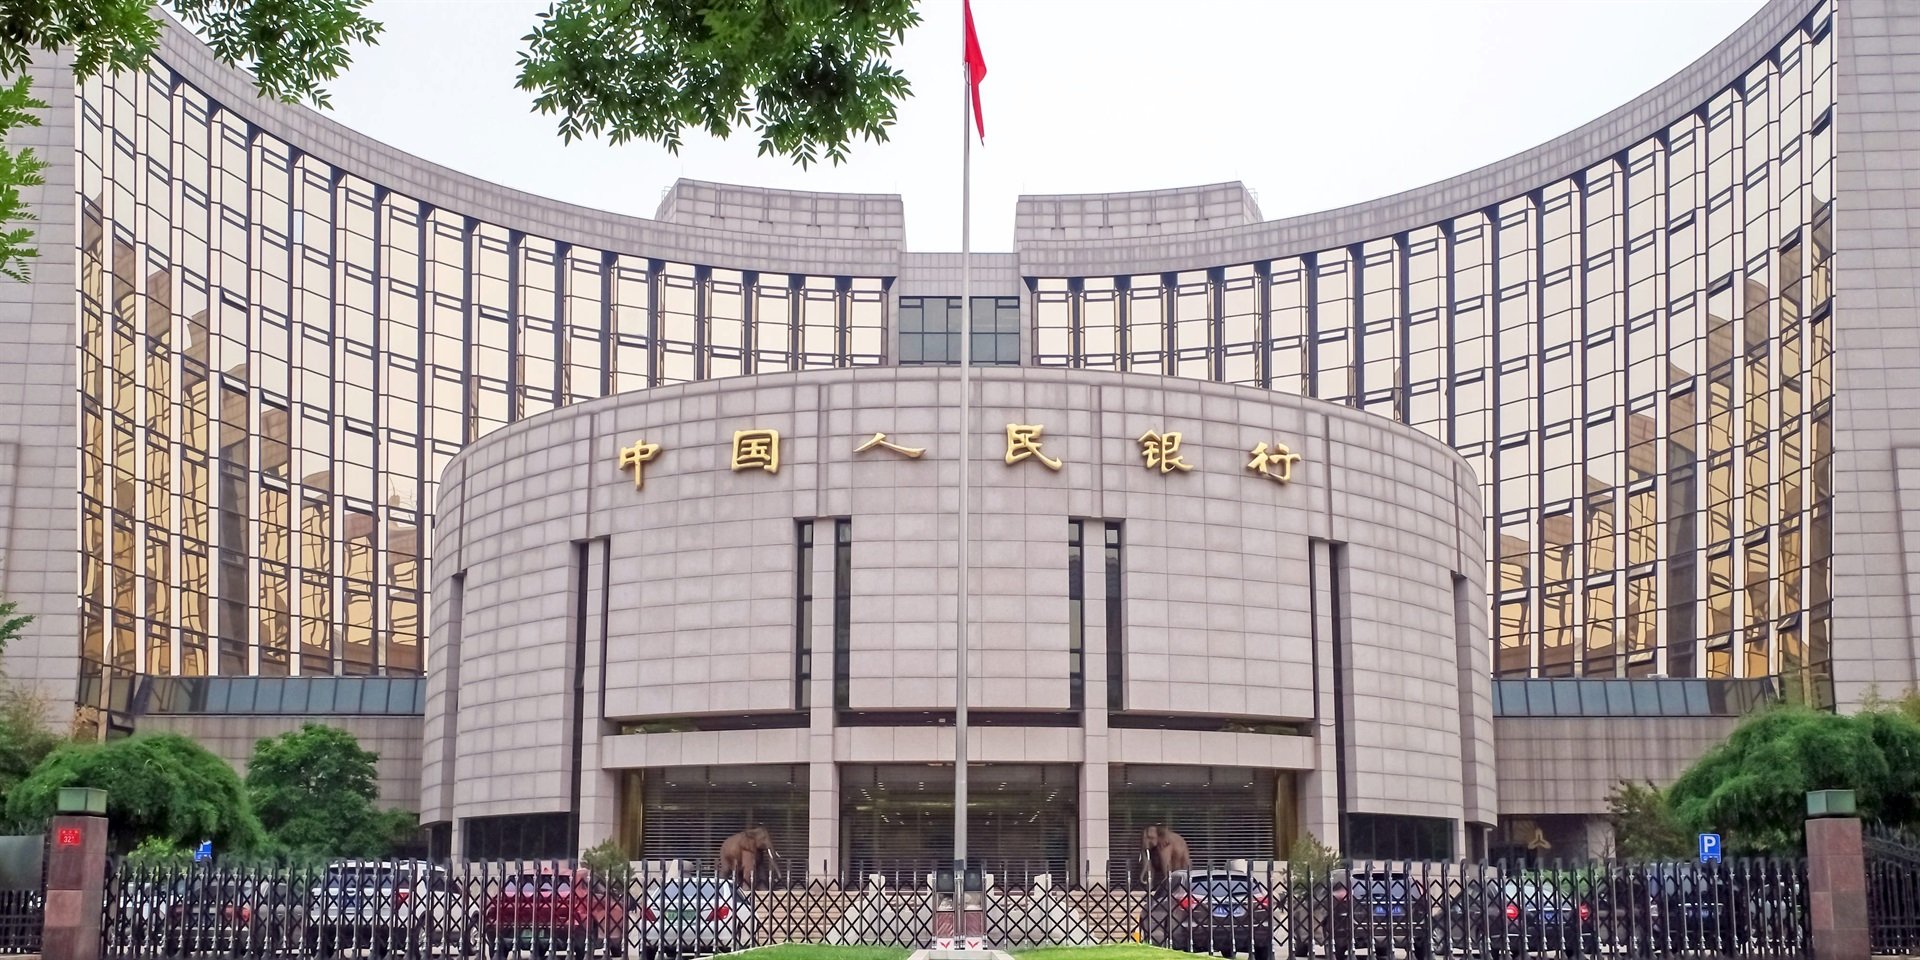 The People's Bank of China building is pictured on June 9, 2021 in Beijing, China. 